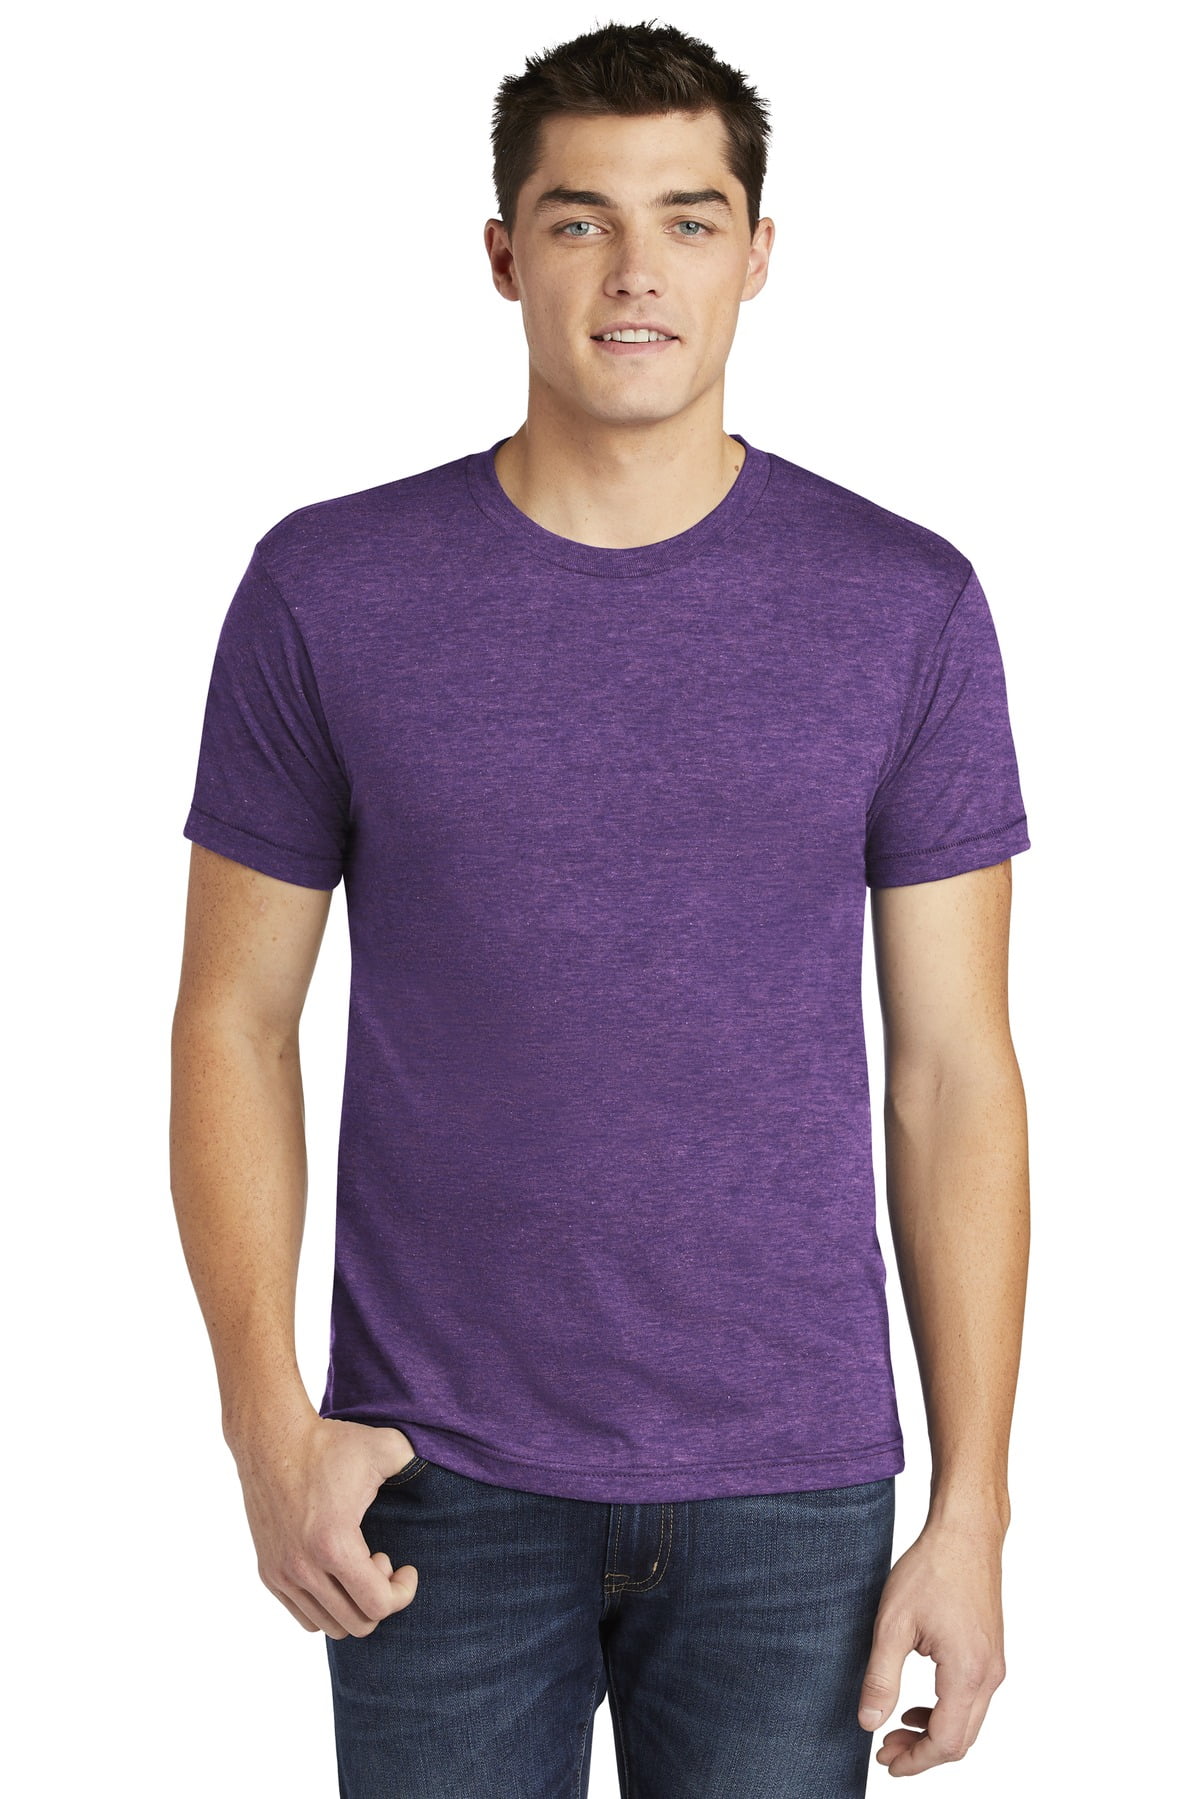 American Apparel Triblend Short Sleeve Track Tee AA006 Adult Casual T-Shirt 